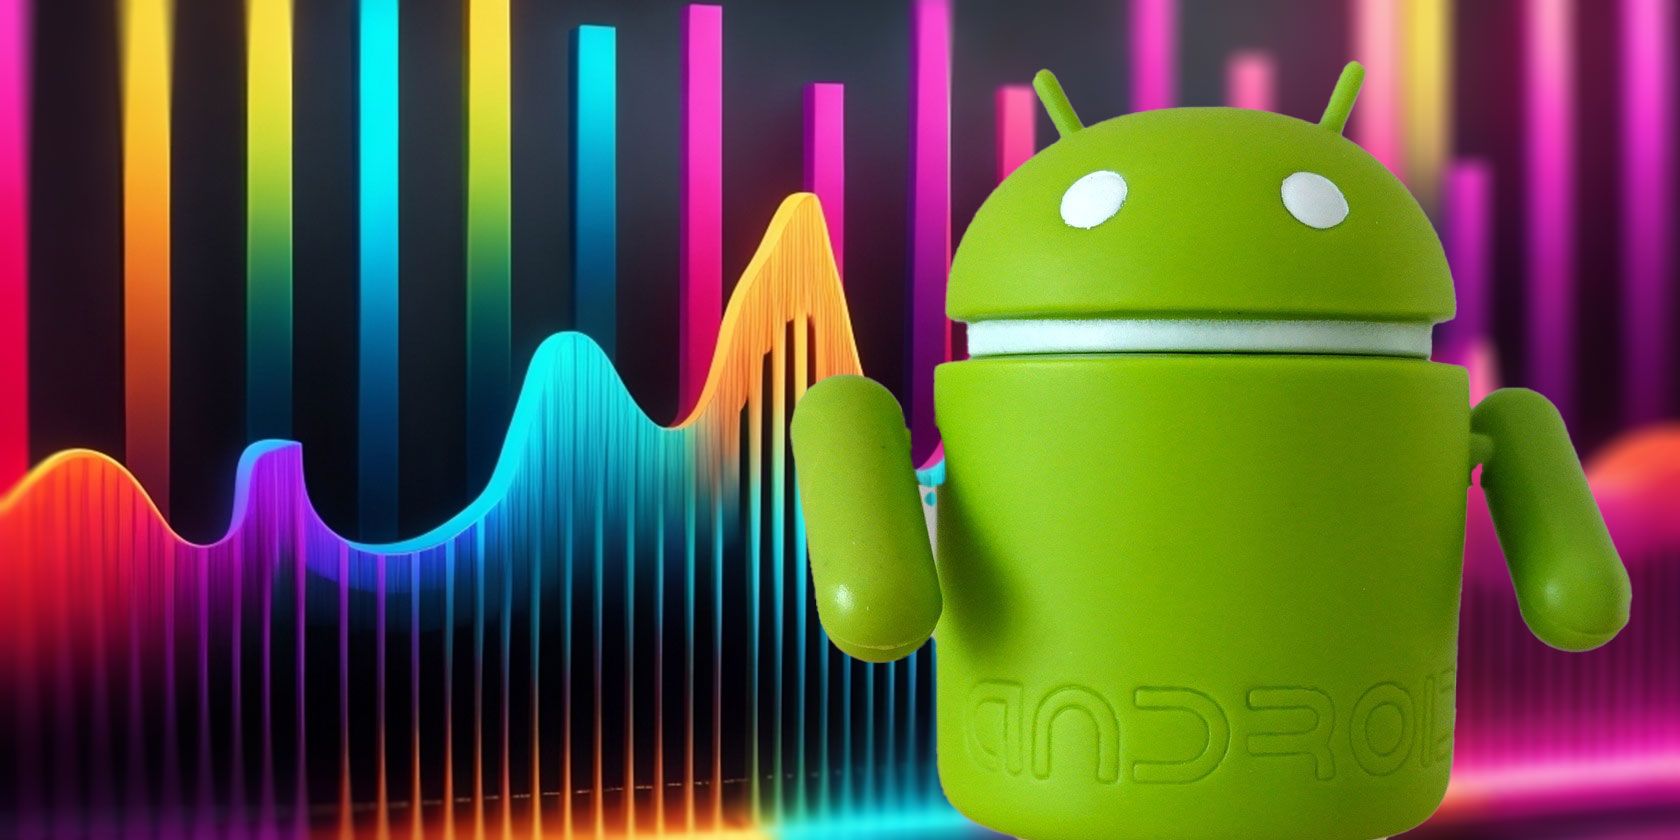 The 5 Best Equalizer Apps for Android in 2023